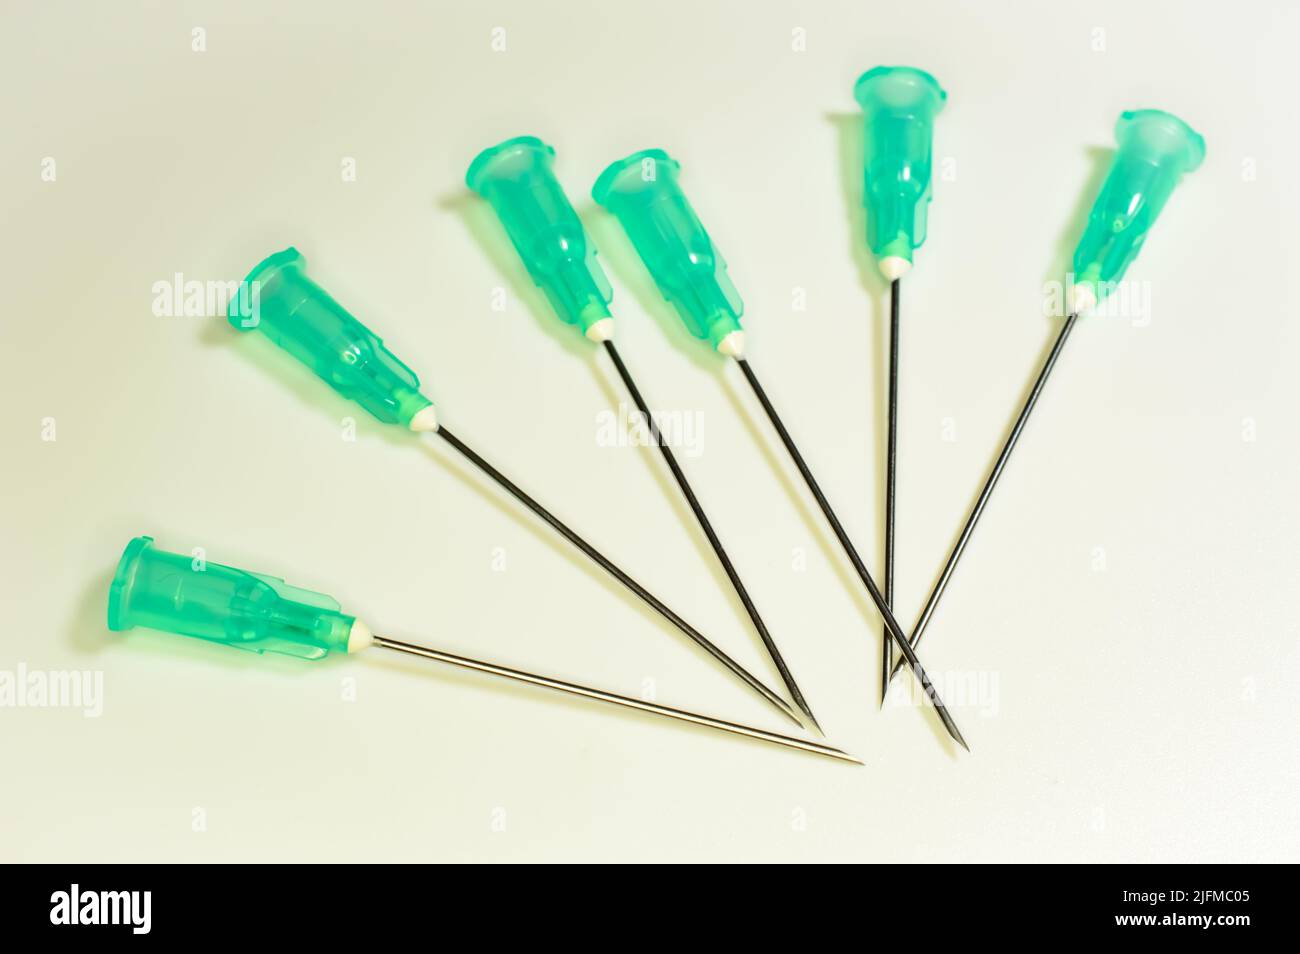 Medical syringe's needles compilation on a white background. Social problems.  Drugs and medical treatment. Stock Photo